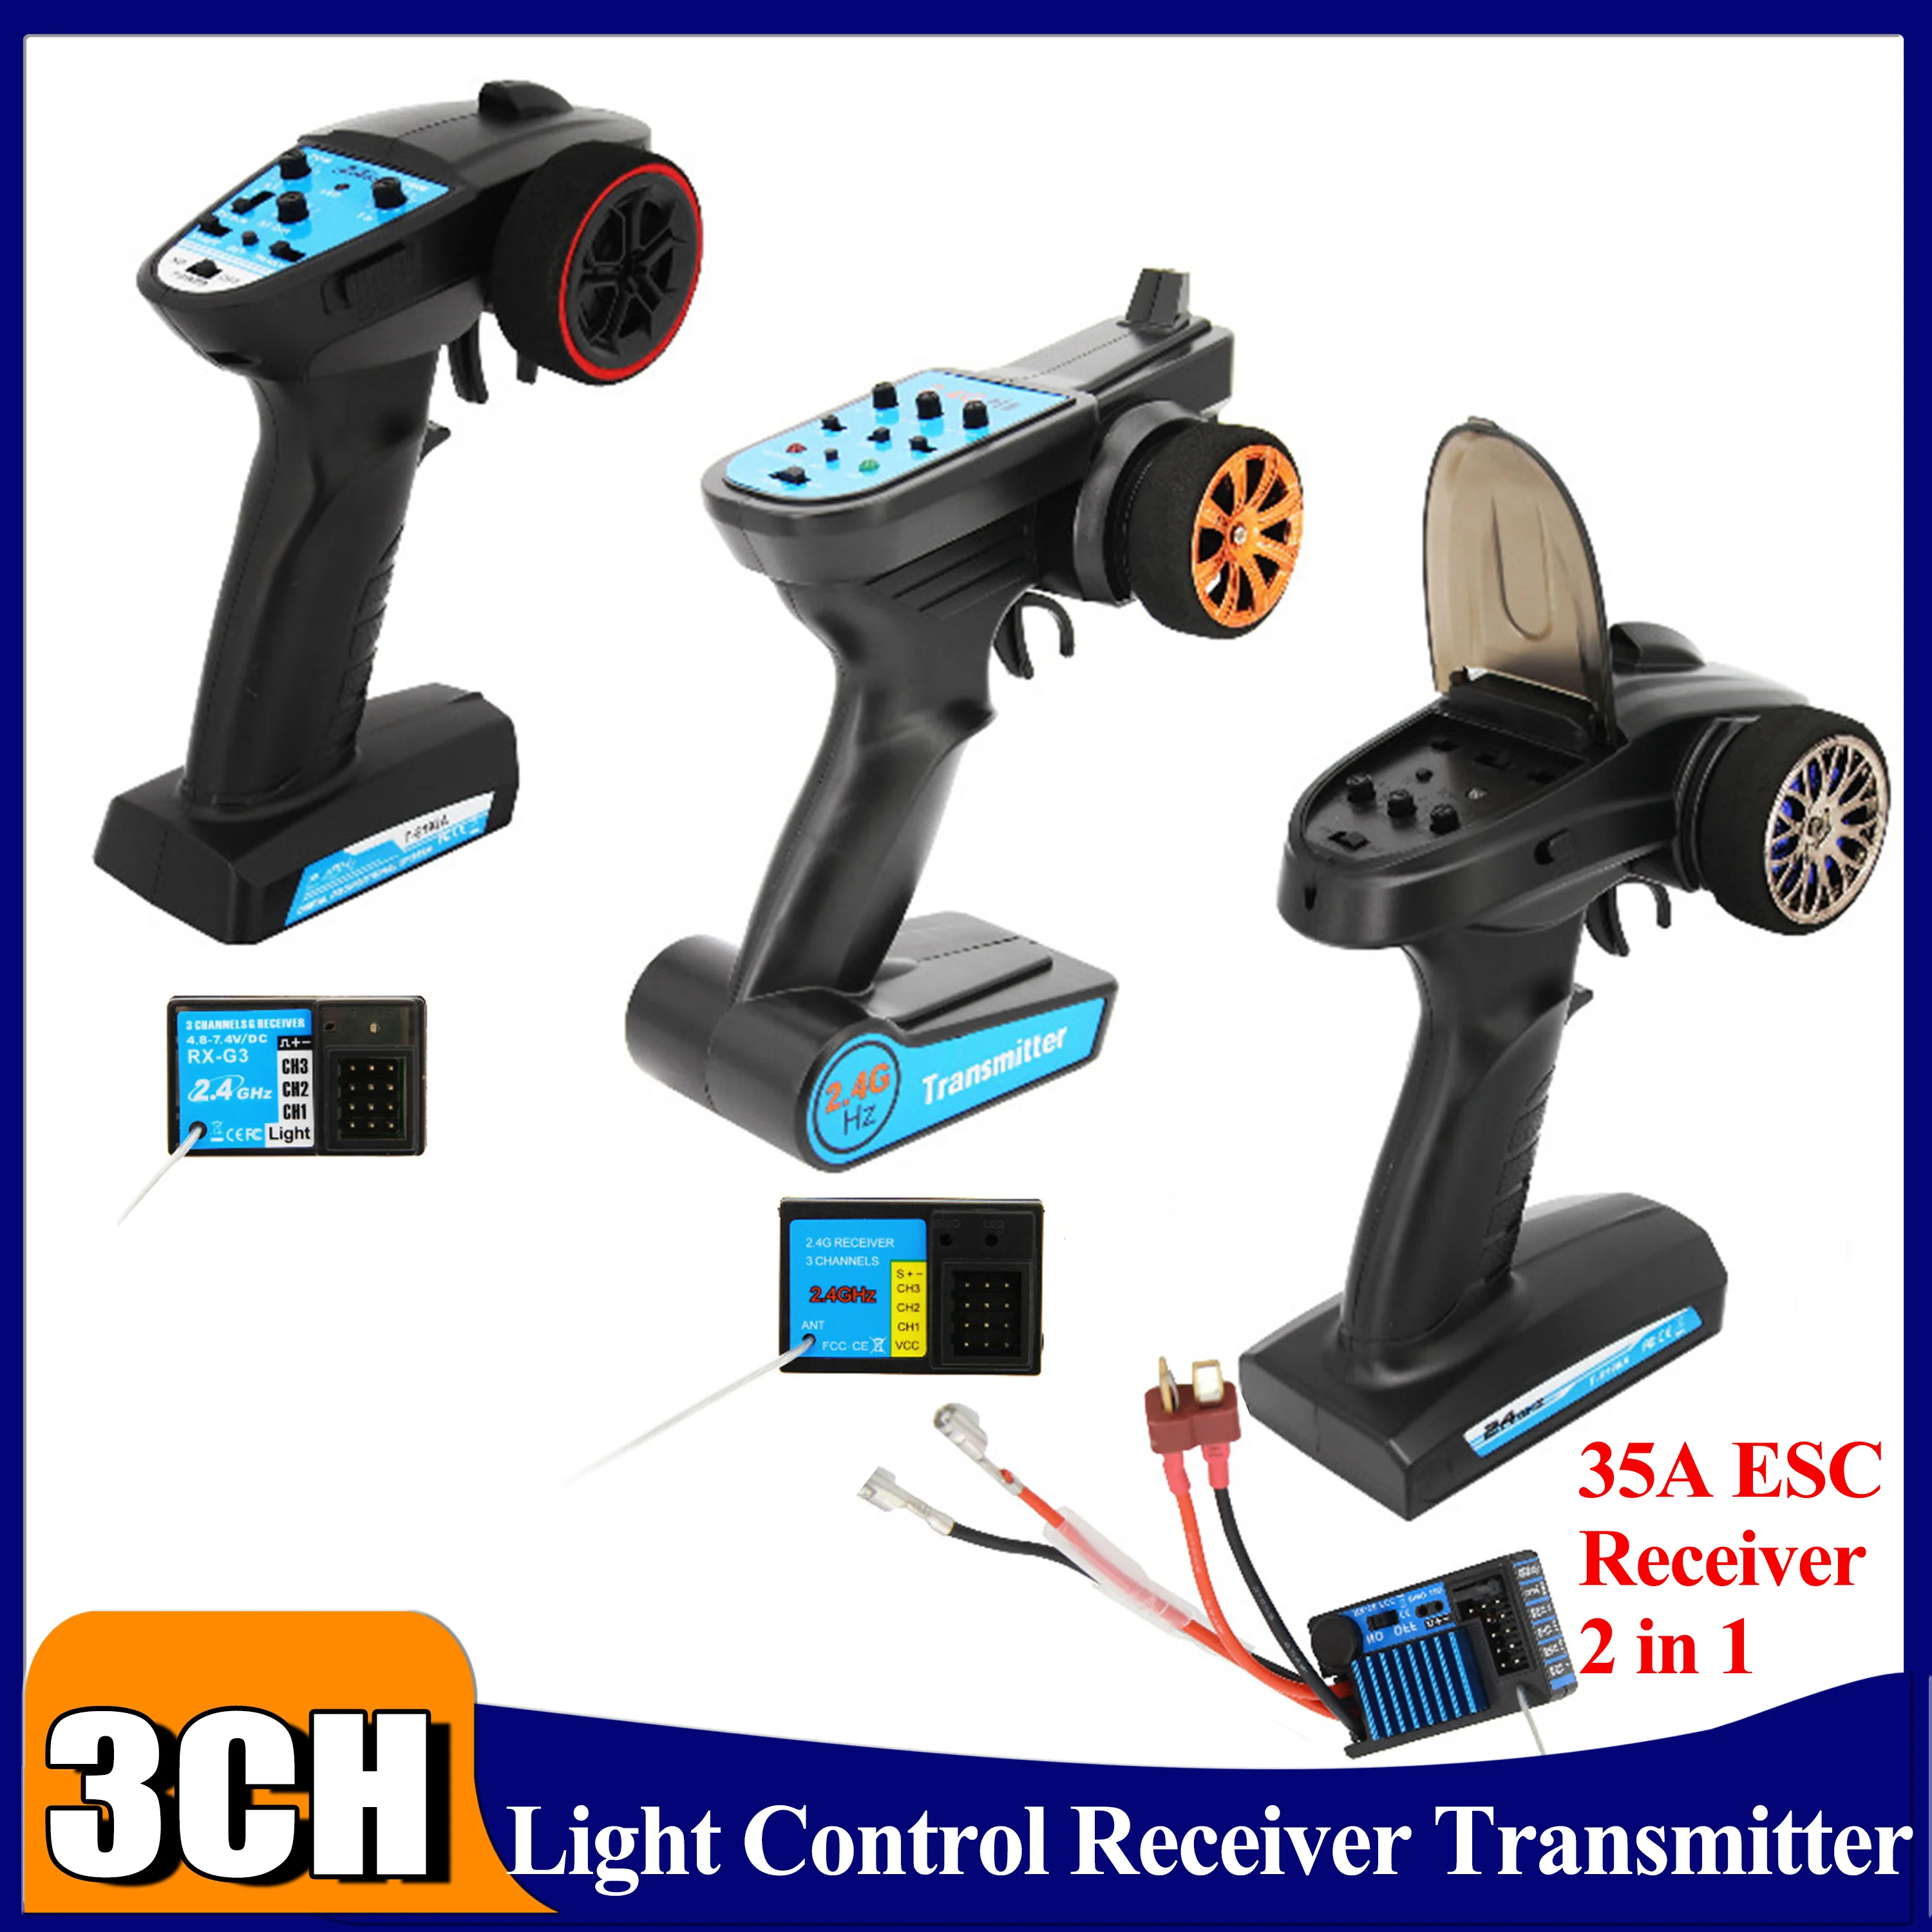 

3CH Transmitter 2.4G Radio Systems Digital 3 Channals Receiver Remote Controller 2-in-1 35A Set for RC Car Tank Boat Truck Model